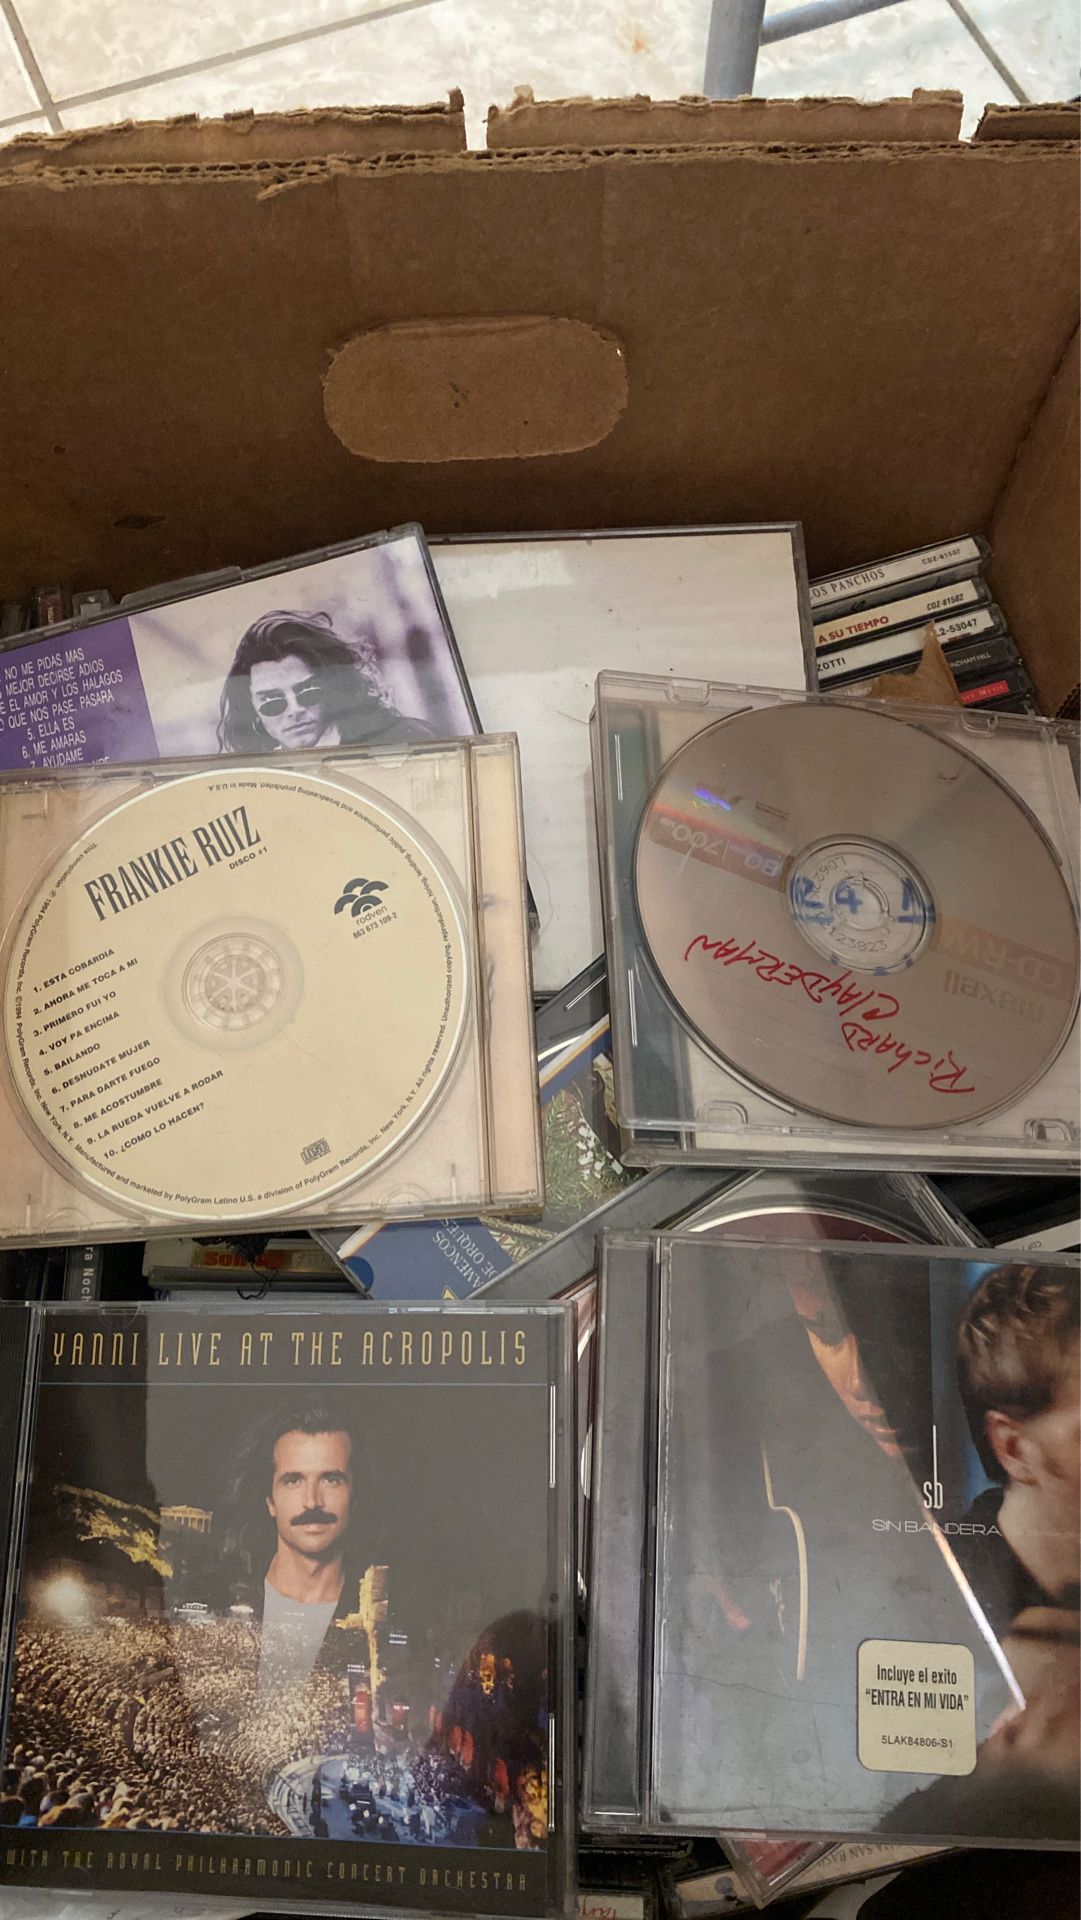 A box of CDs. Latin Music. Too many to list here. $25 for the whole box.